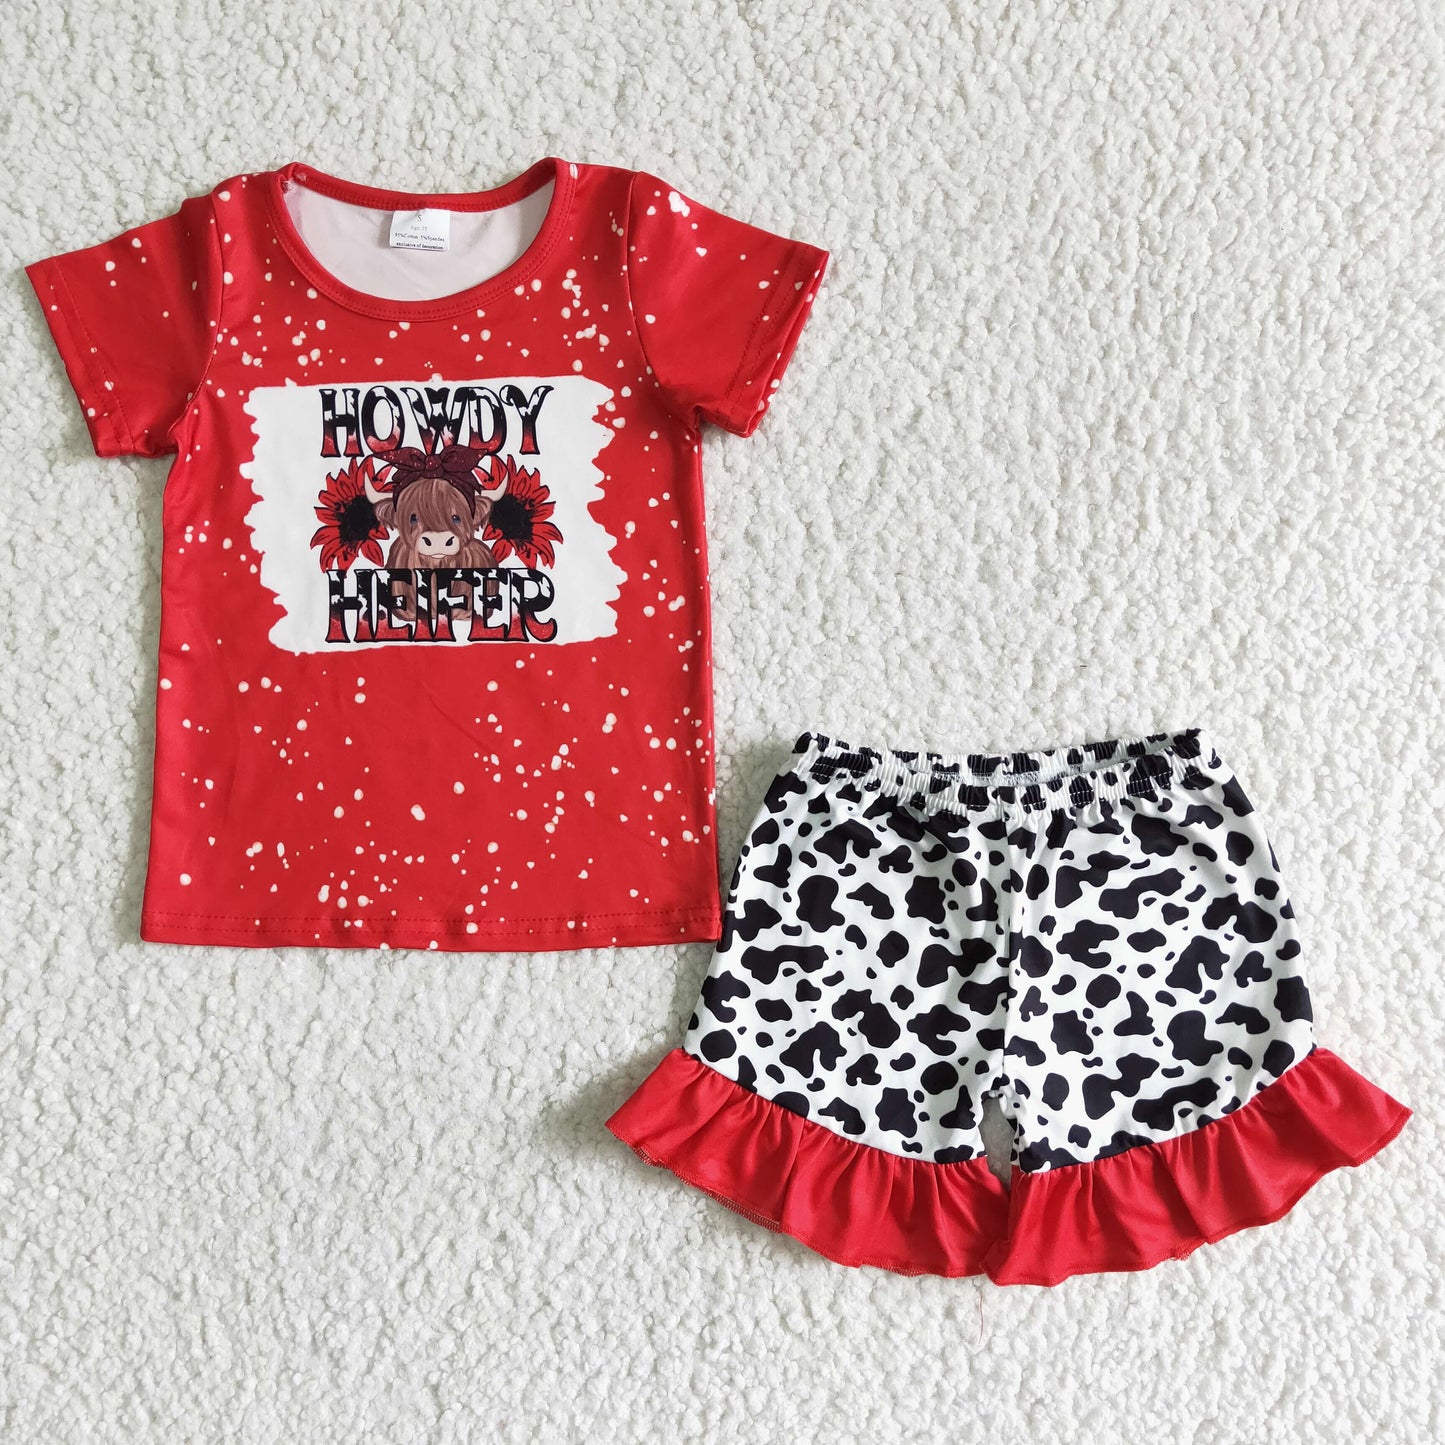 howdy heifer girl shorts set summer outfit red